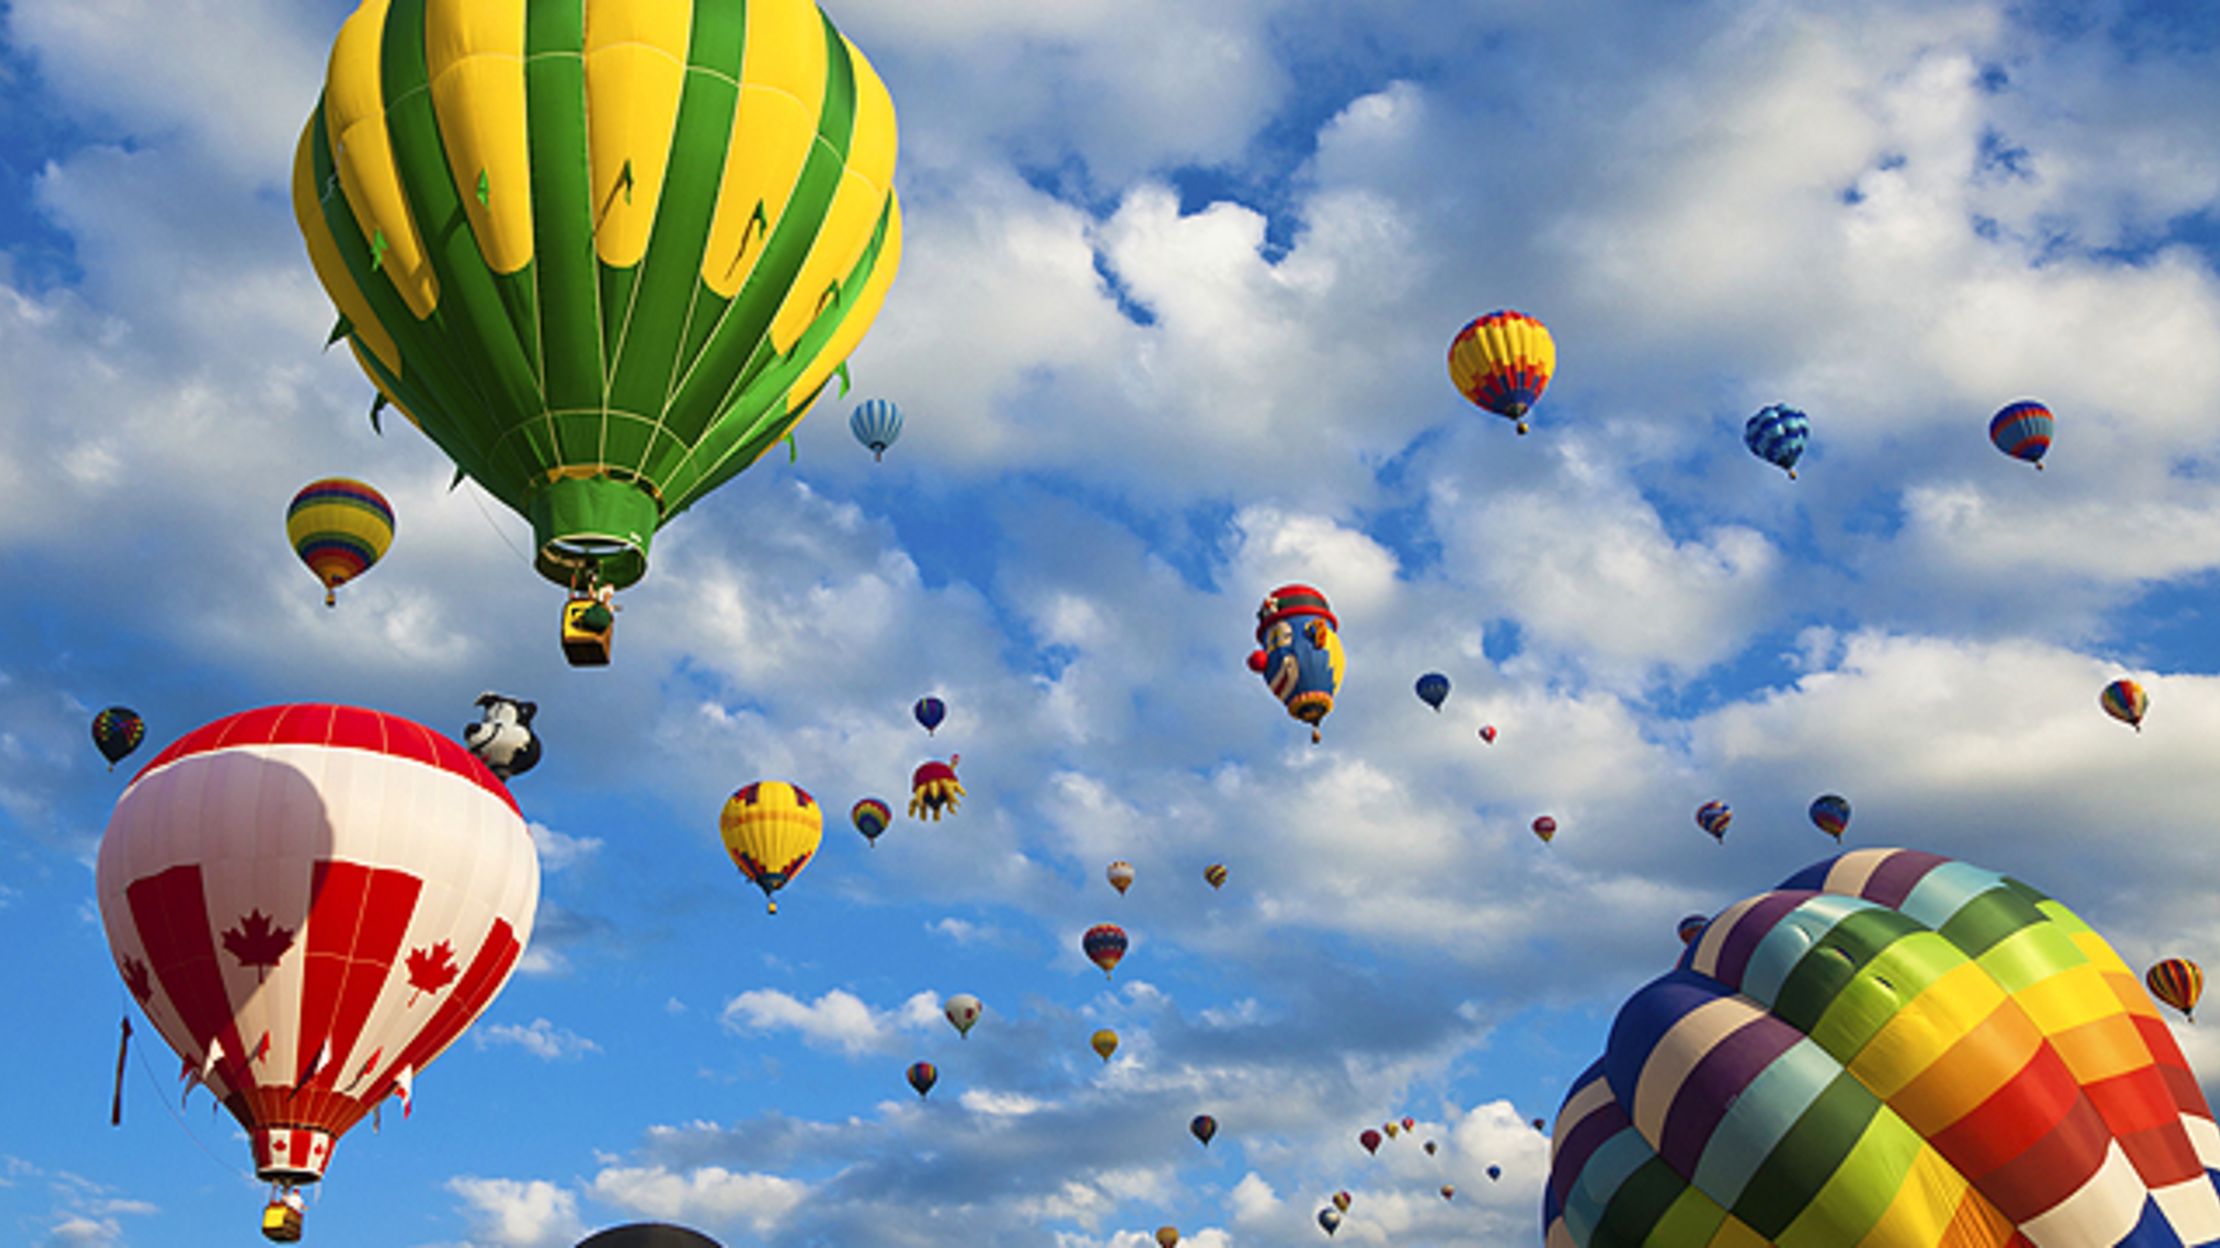 10 Strange Facts About Hot Air Balloons | Mental Floss